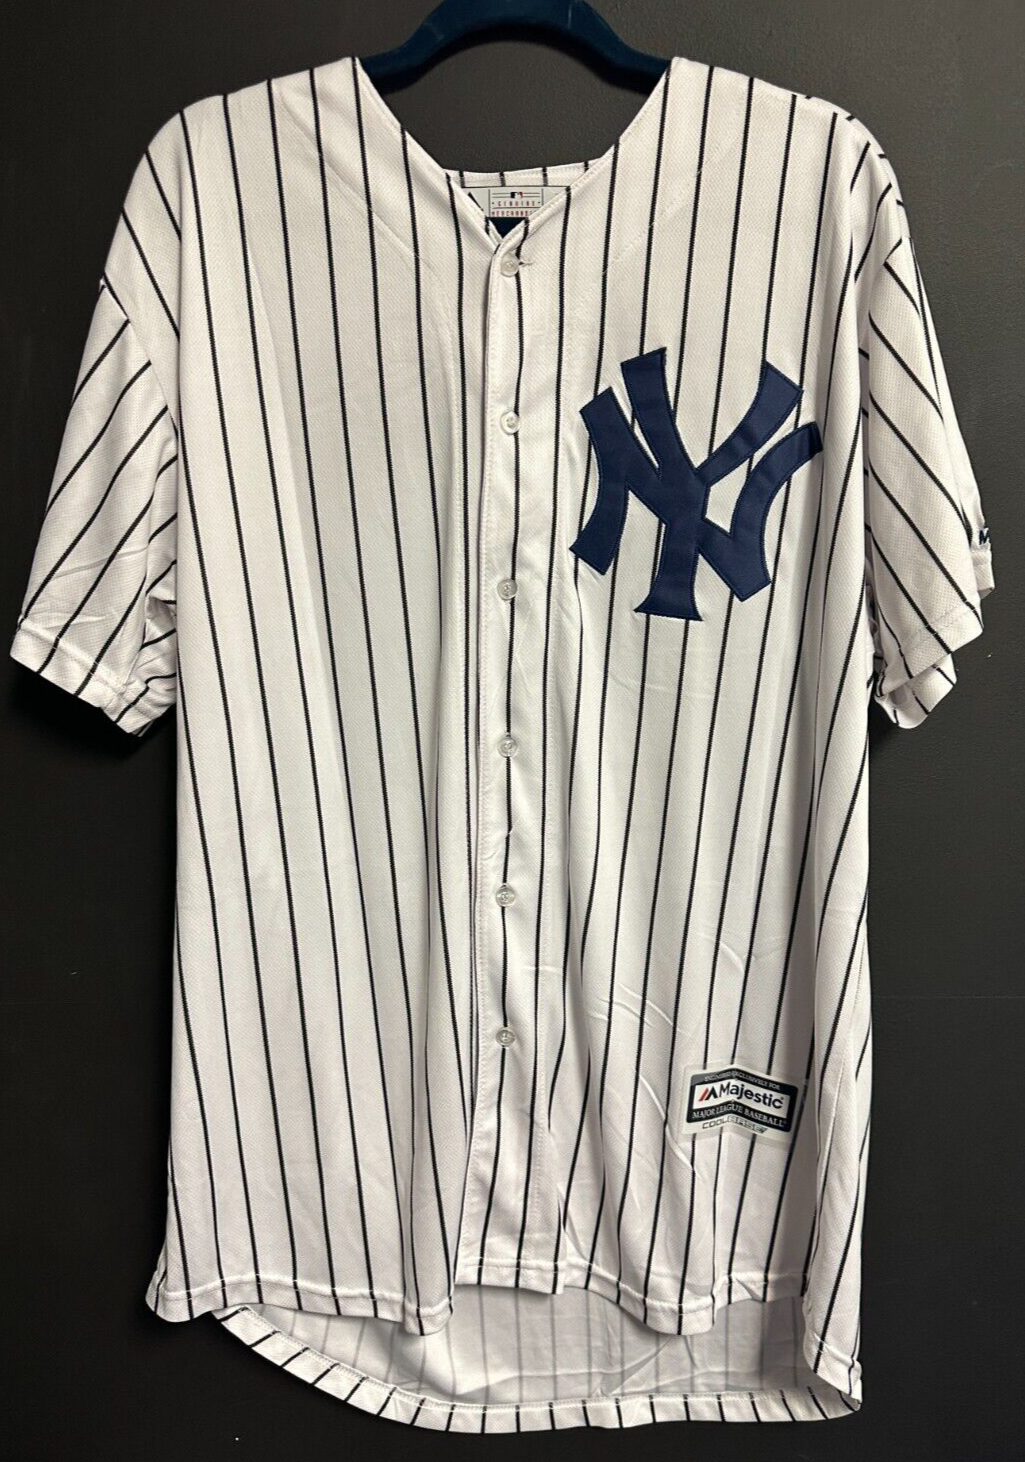 Giancarlo Stanton Autographed New York Yankees Home Jersey BAS